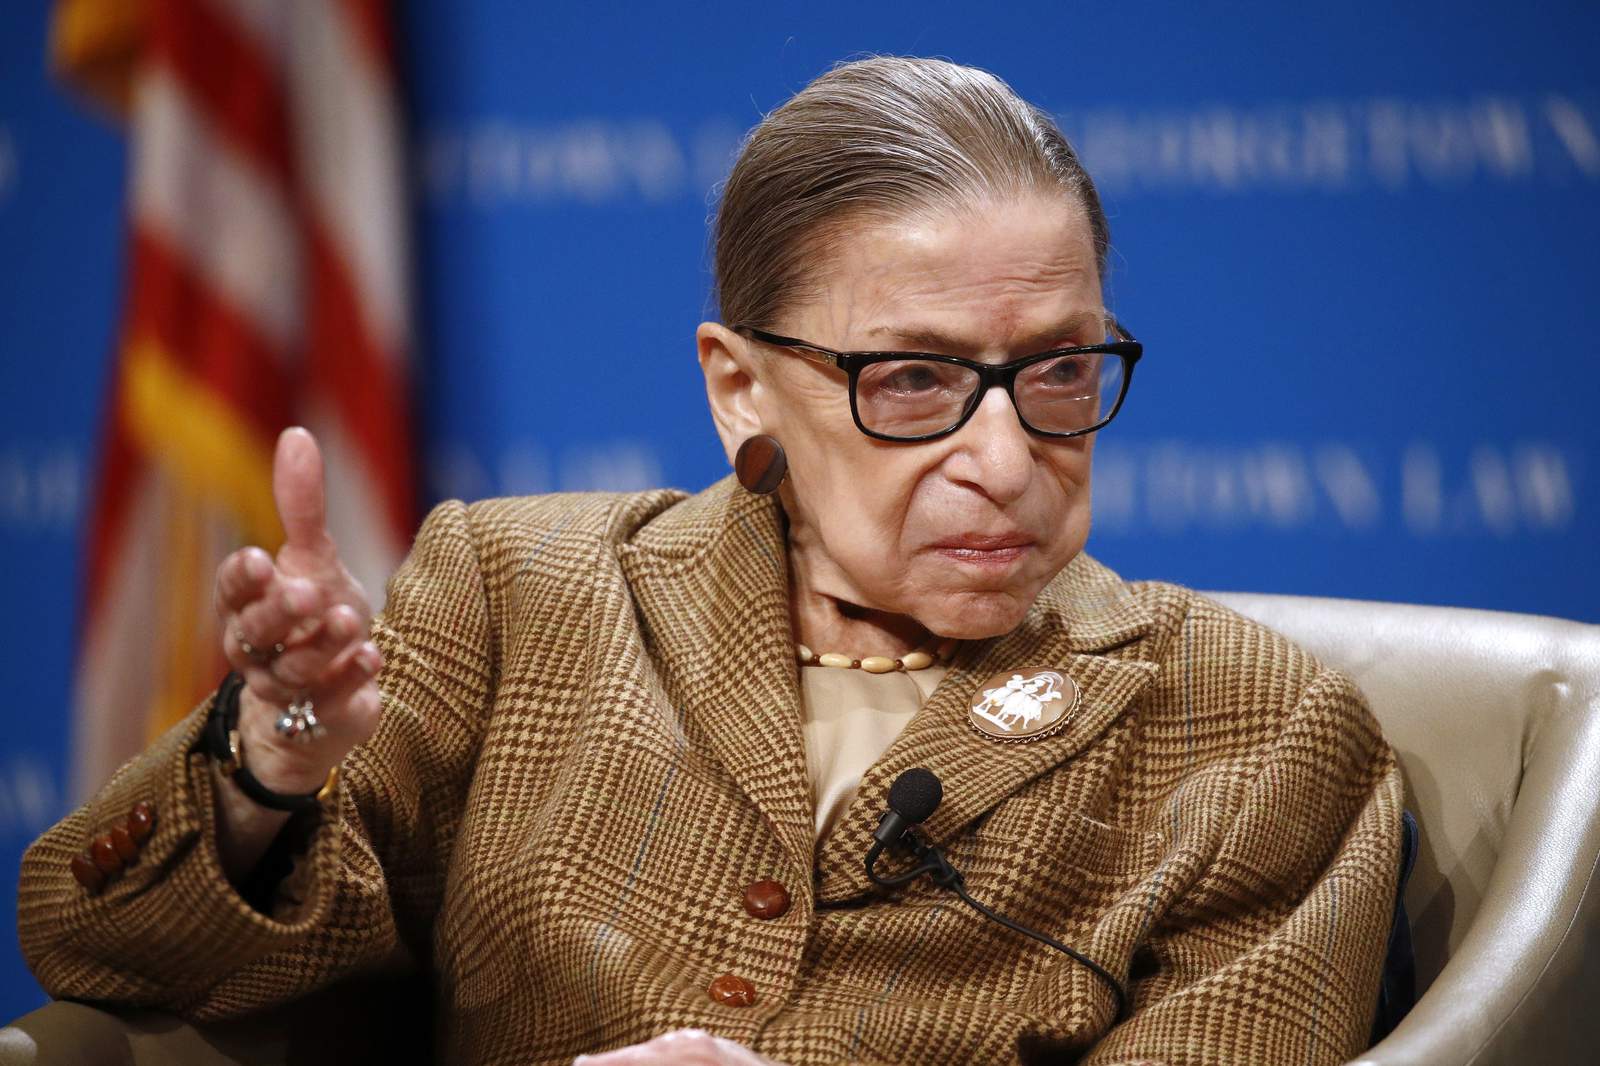 Justice Ginsburg says cancer has returned, but won't retire